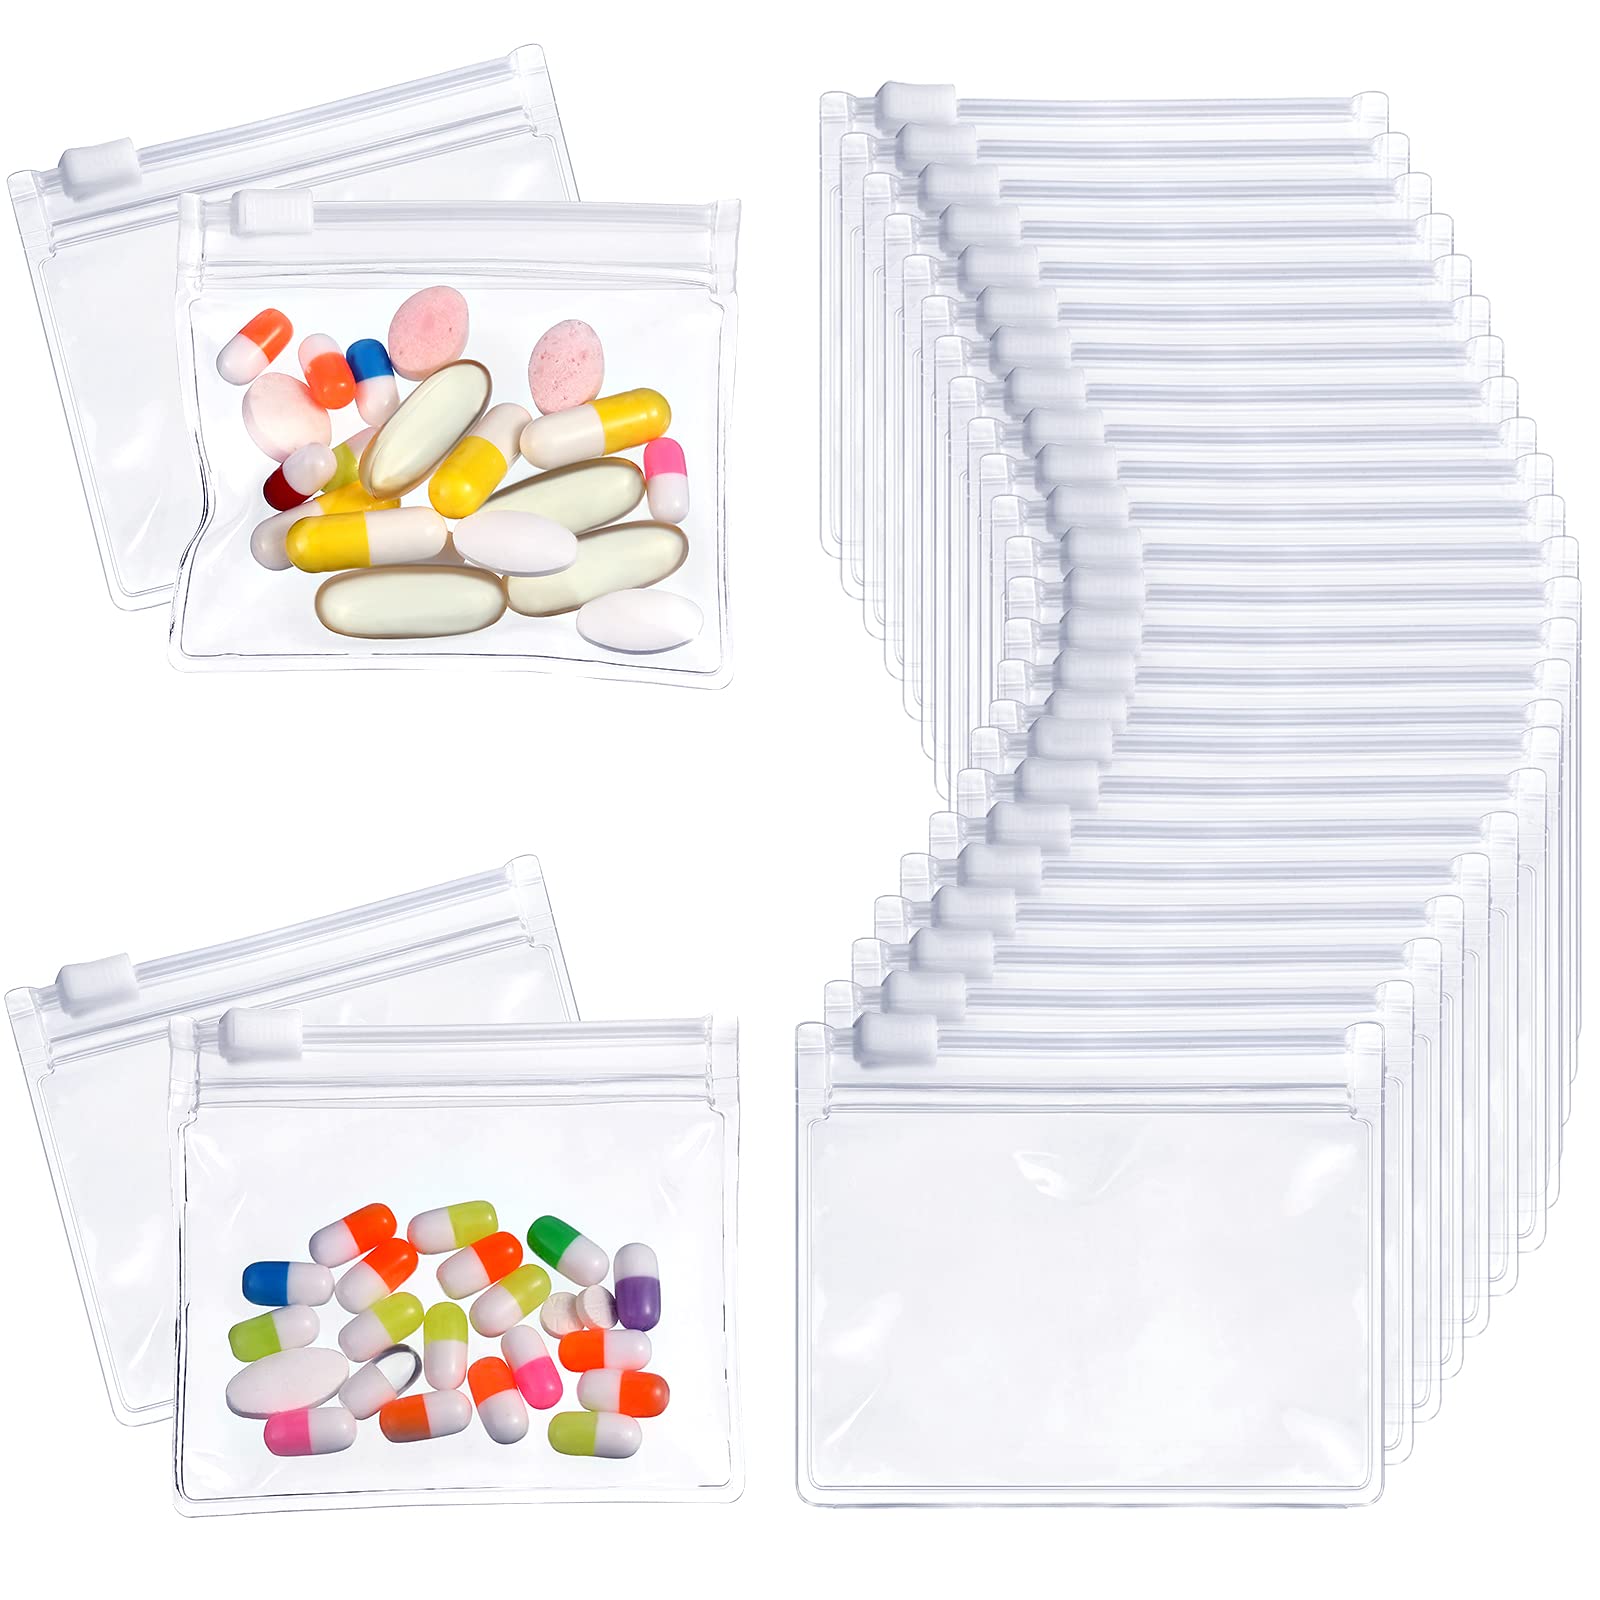  20 Black Pouches for Pill Organizer,Pill Pouch Bags Zippered  Reusable Pill Pouches Clear Plastic Pill Bags Self Sealing Travel Medicine  Organizer Storage : Health & Household